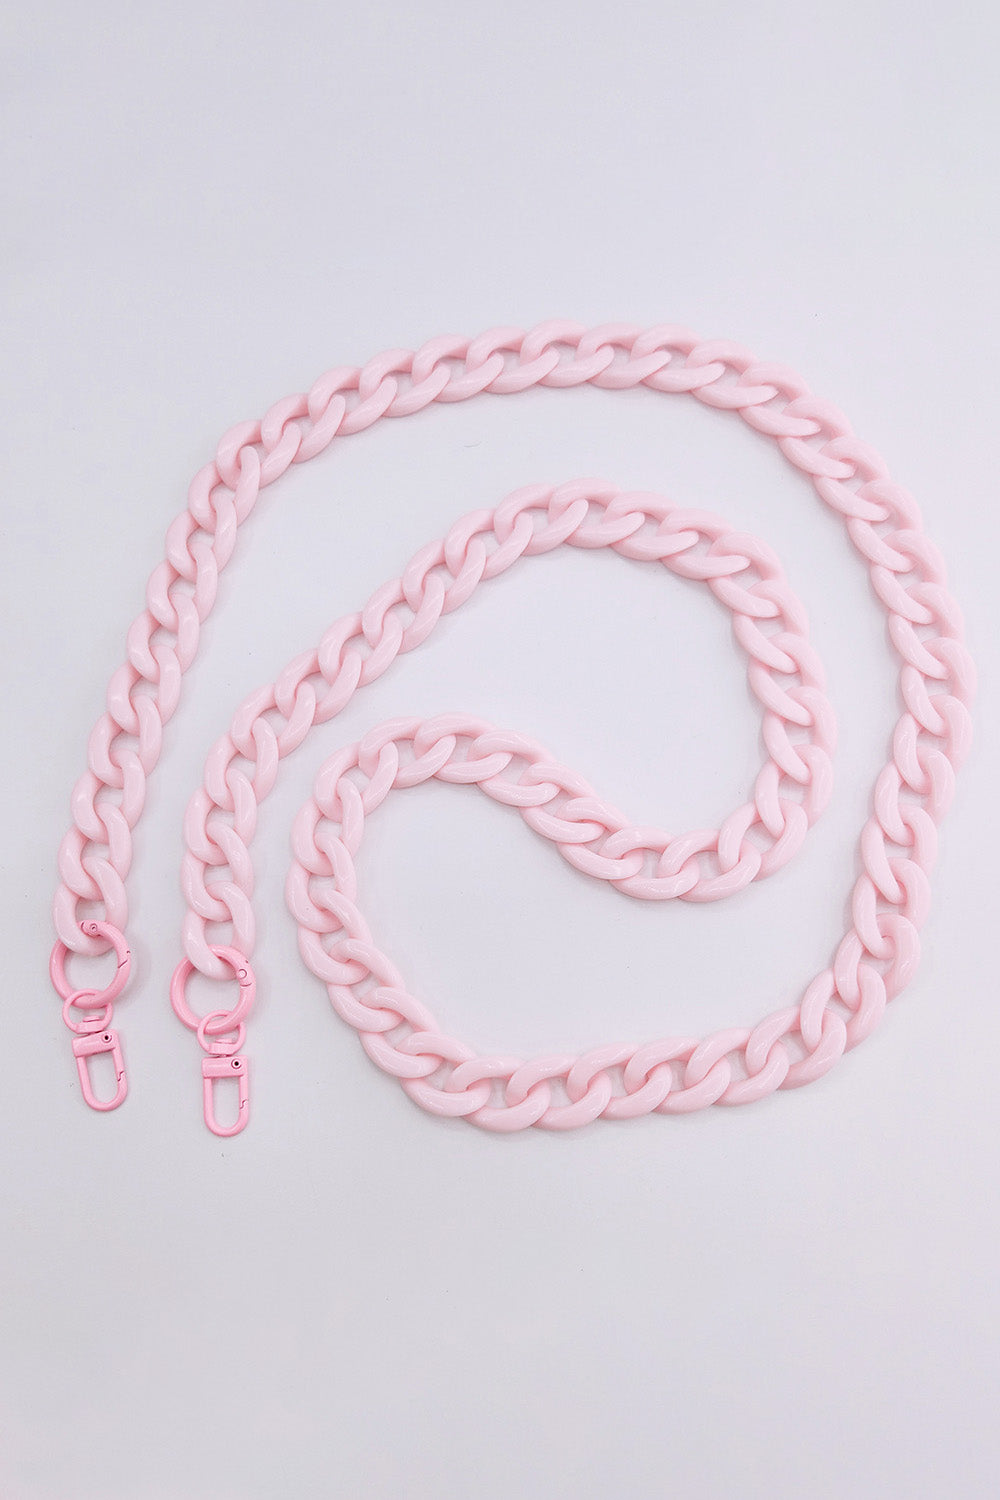 Trendsi Cupid Beauty Supplies Blush Pink / One Size Keychains Resin Crossbody Chain